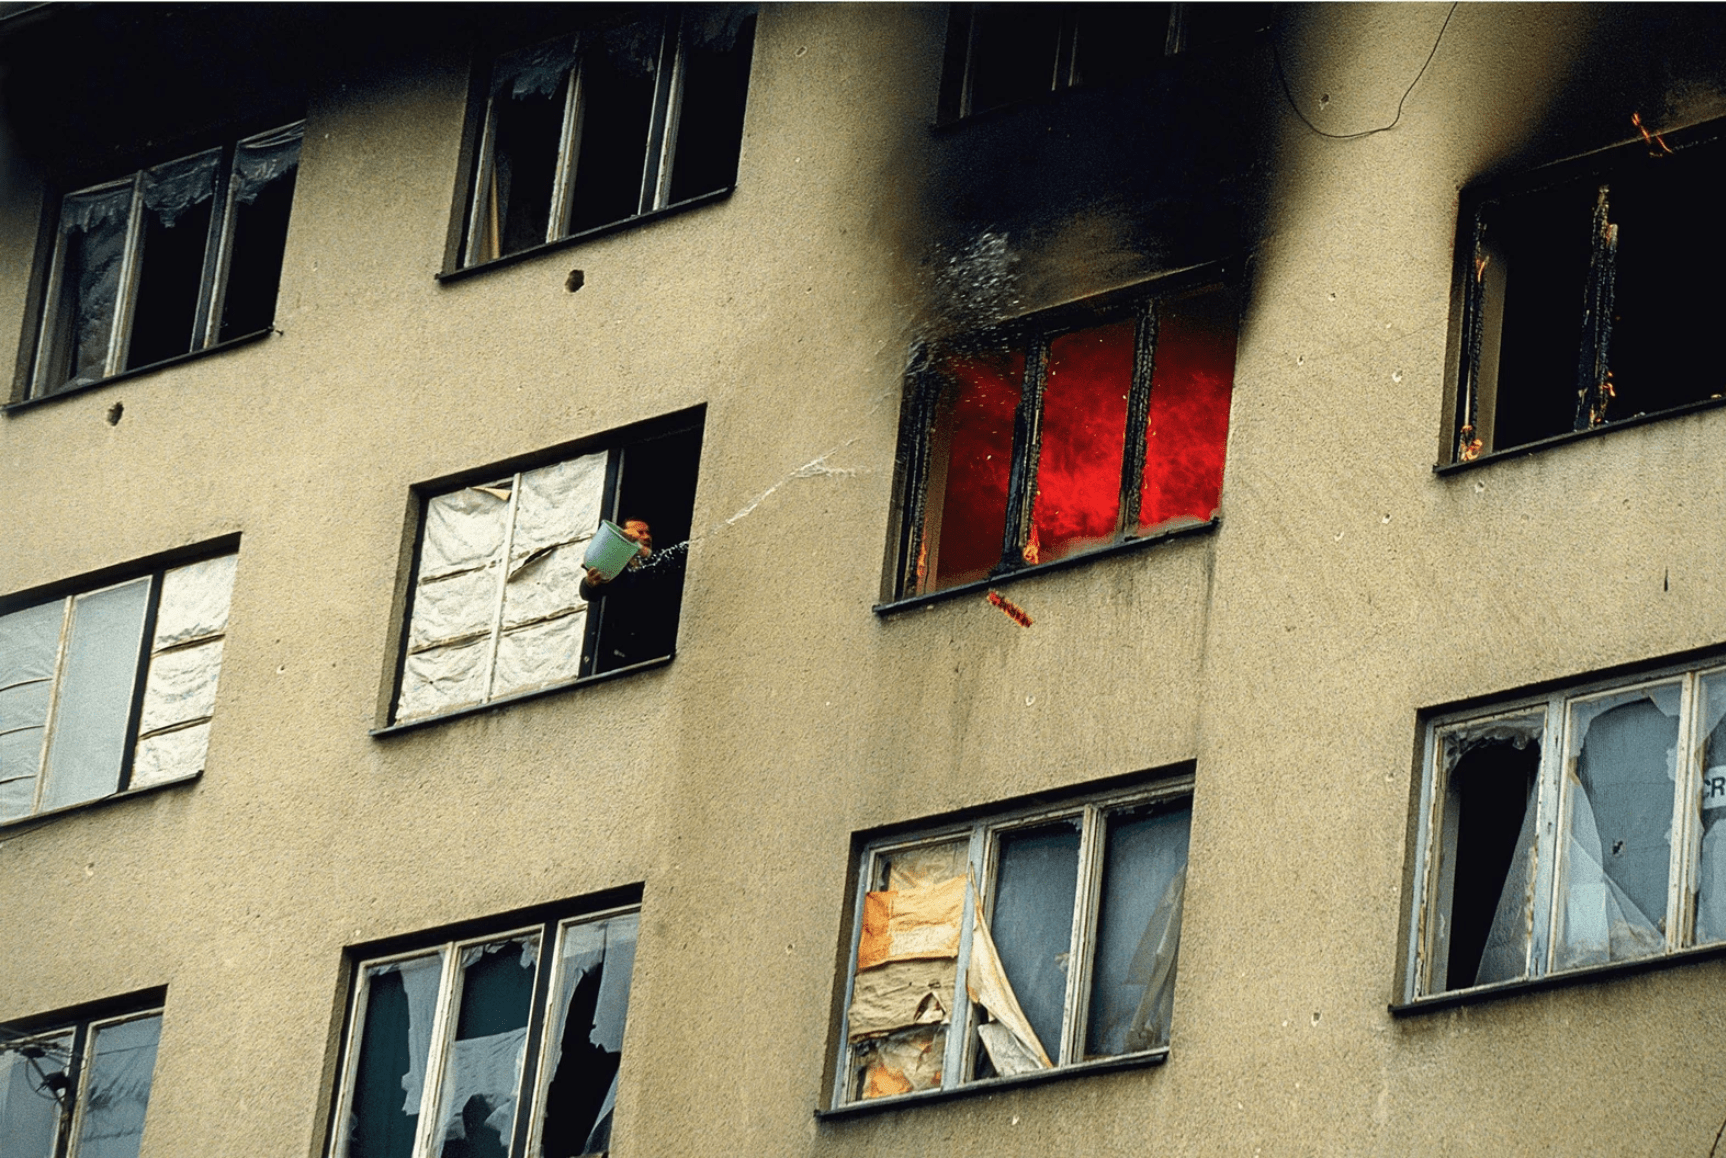 A Serb man attempts to put out a fire that was caused by Serb arsonists in the Sarajevo suburb Grbavica, Bosnia, 1996.